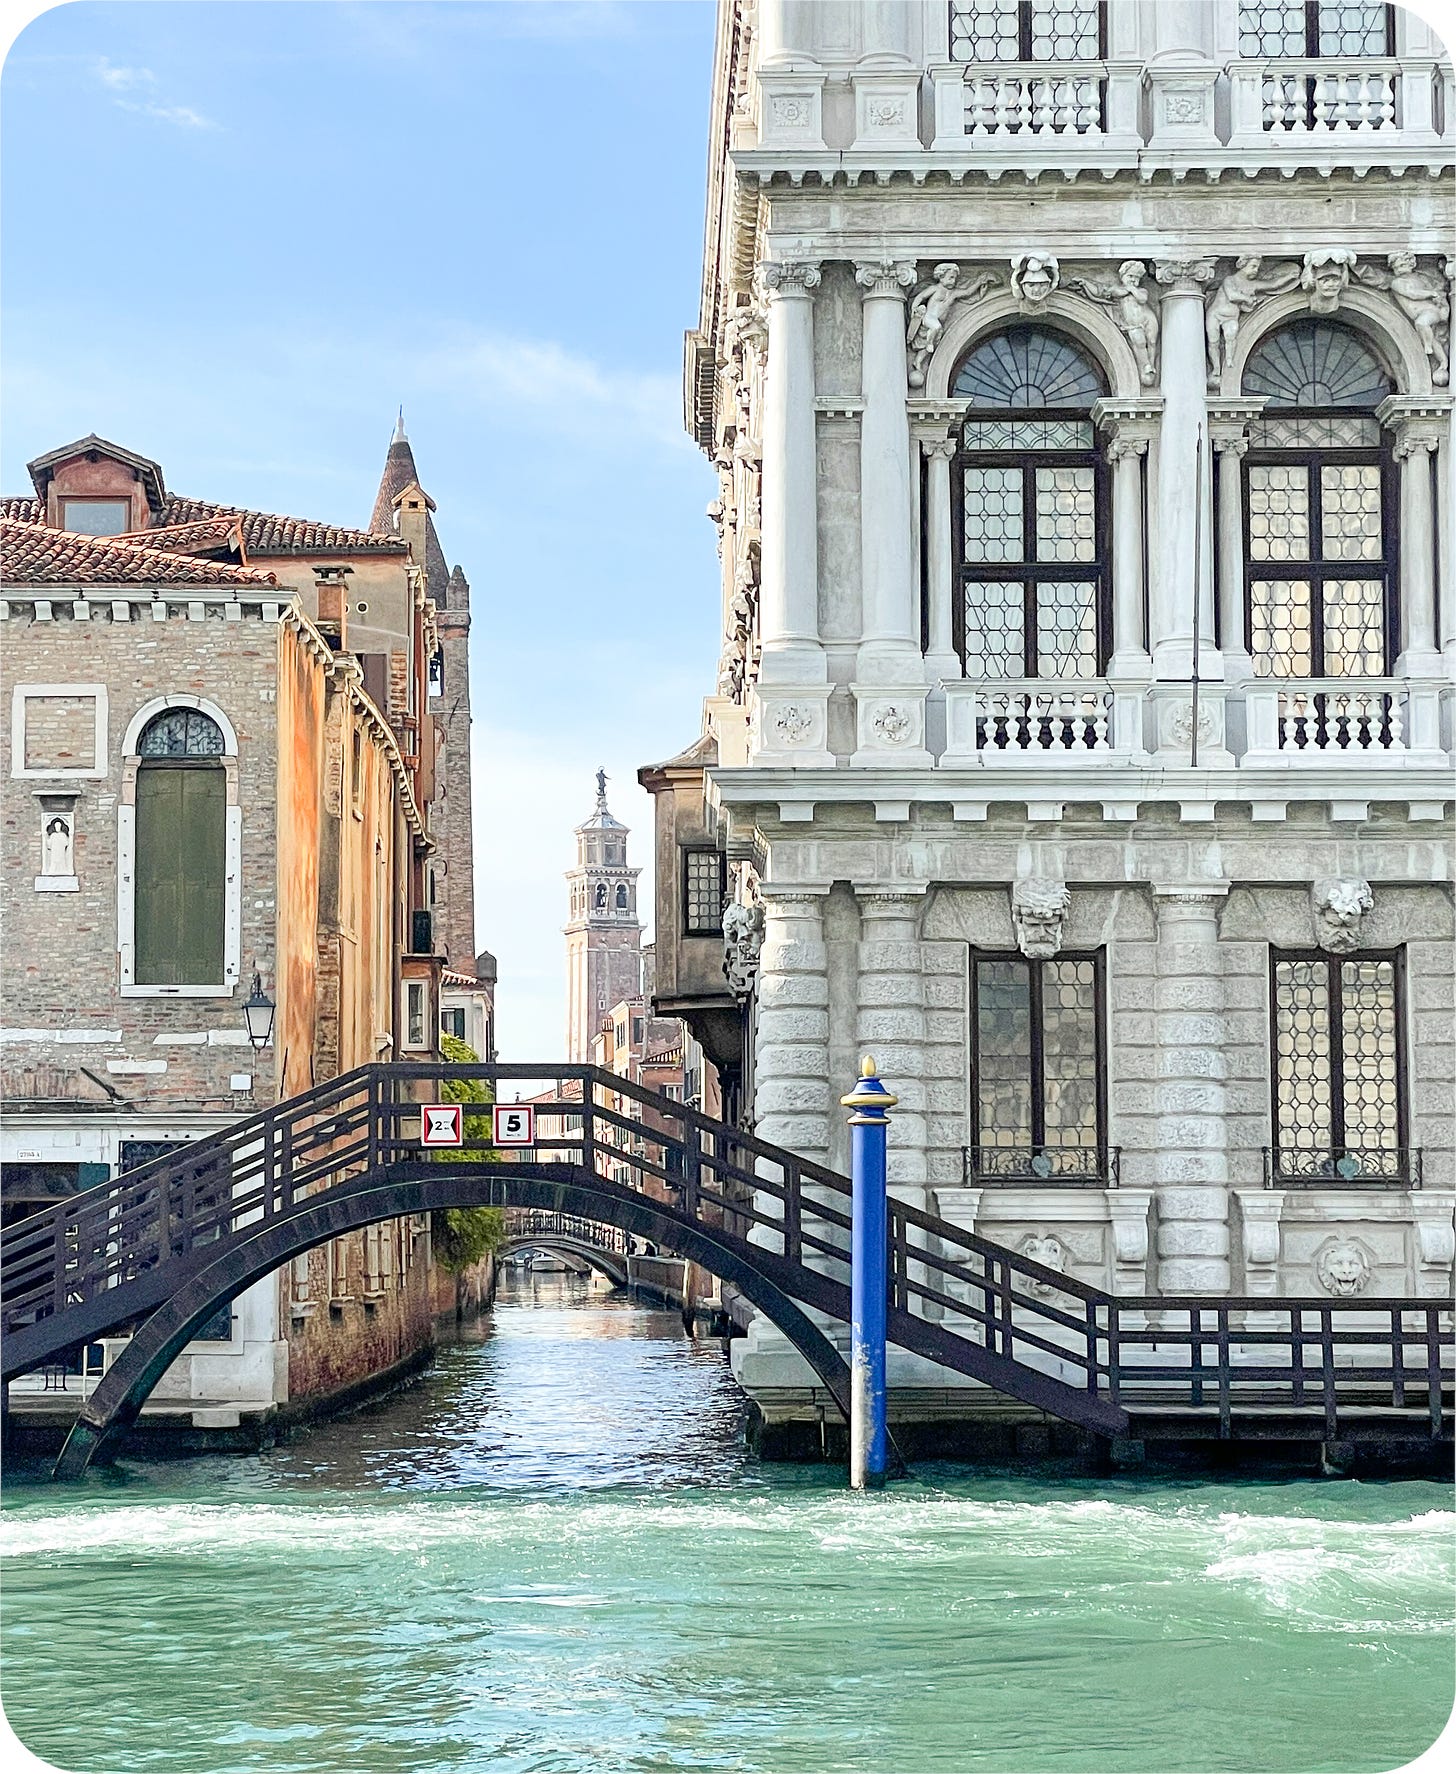 A palazzo on the Grand Canal, Venice, Italy